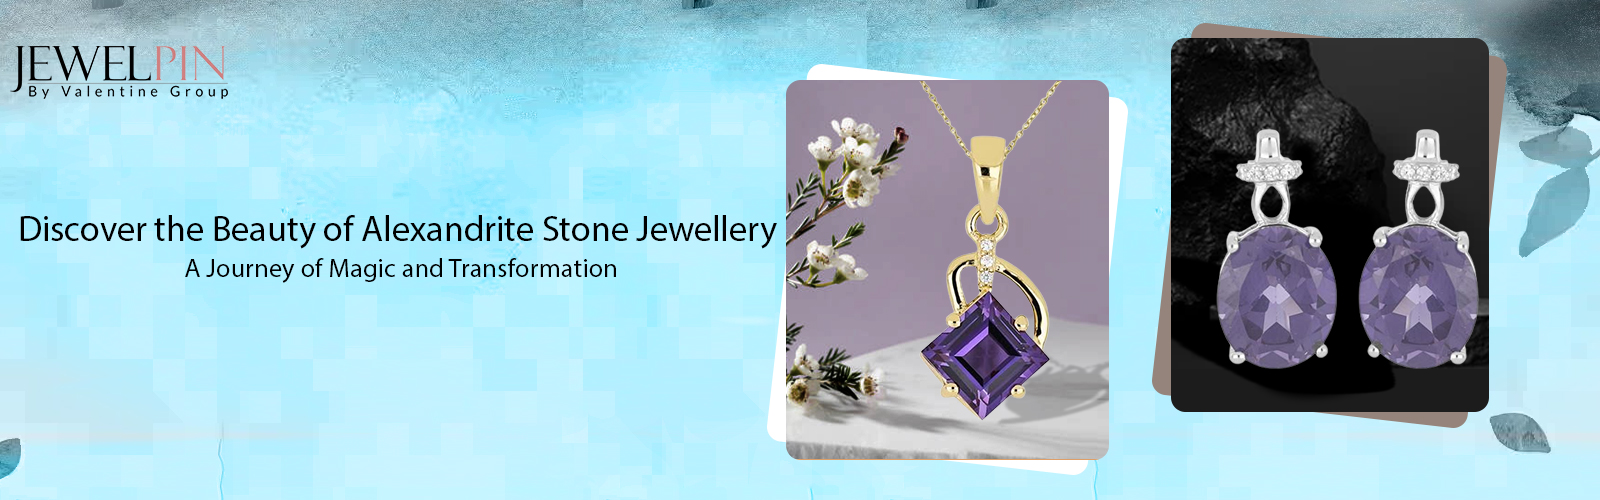 alexandrite stone jewellery a journey of magic and transformation